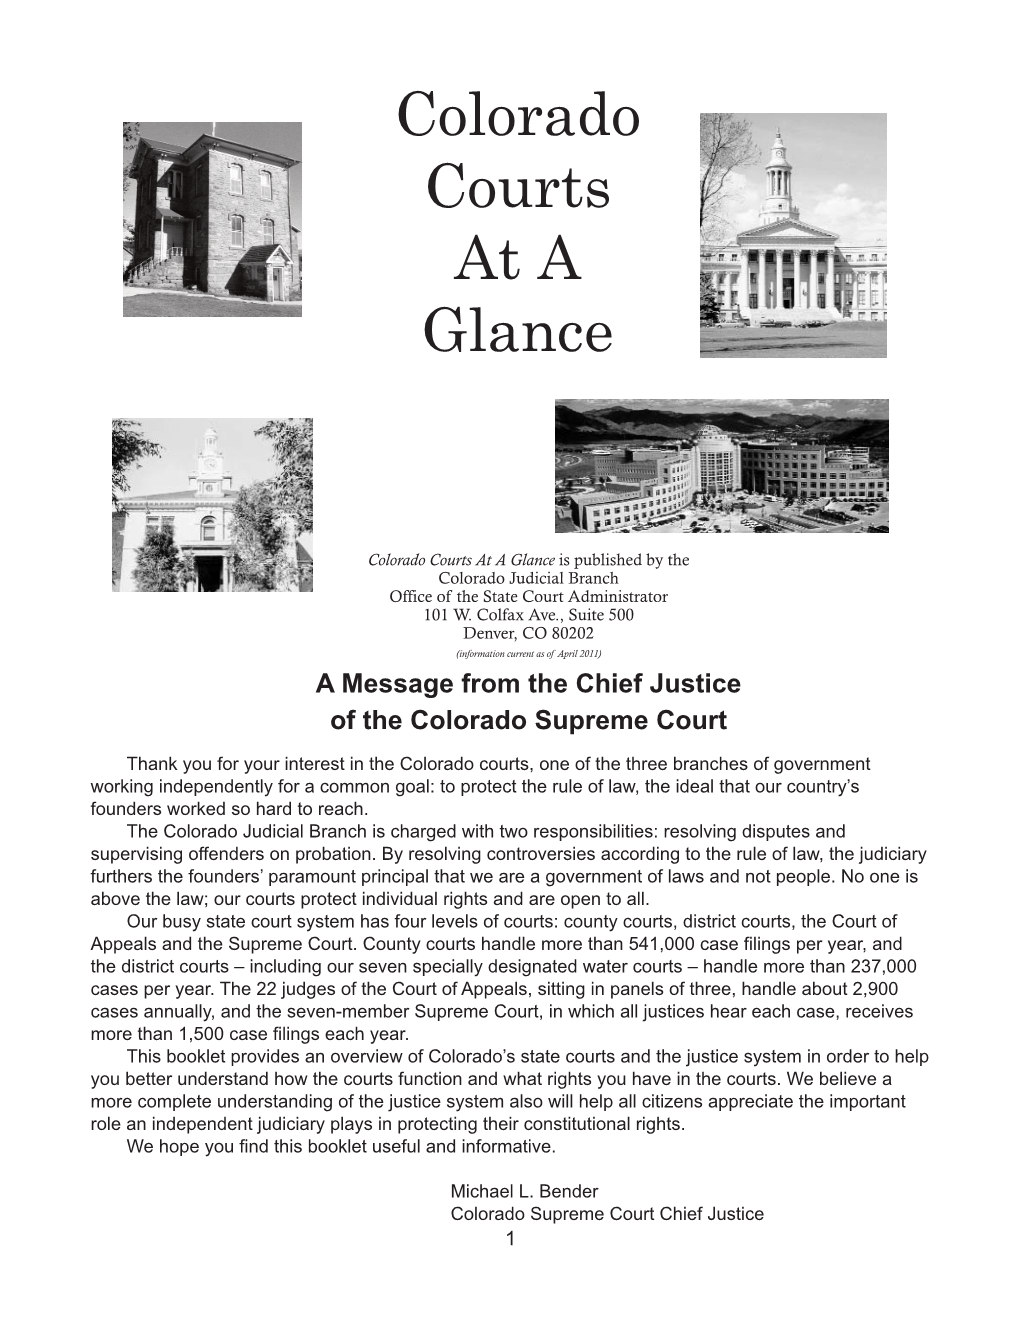 Colorado Courts at a Glance